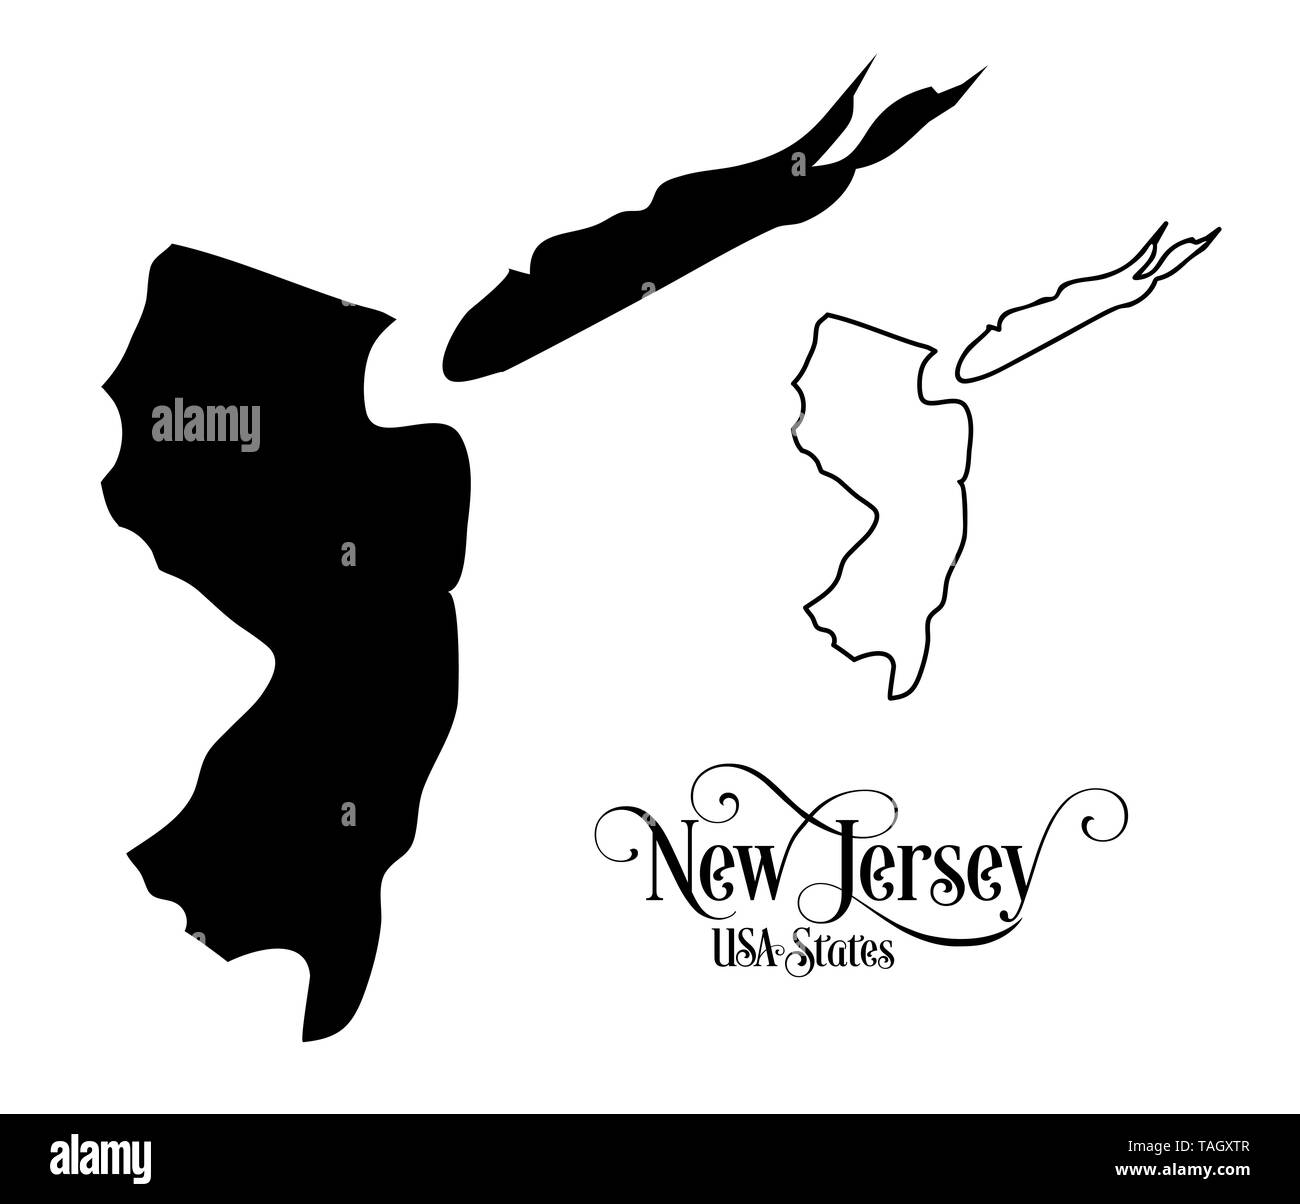 Map of The United States of America (USA) State of New Jersey - Illustration on White Background. Stock Photo